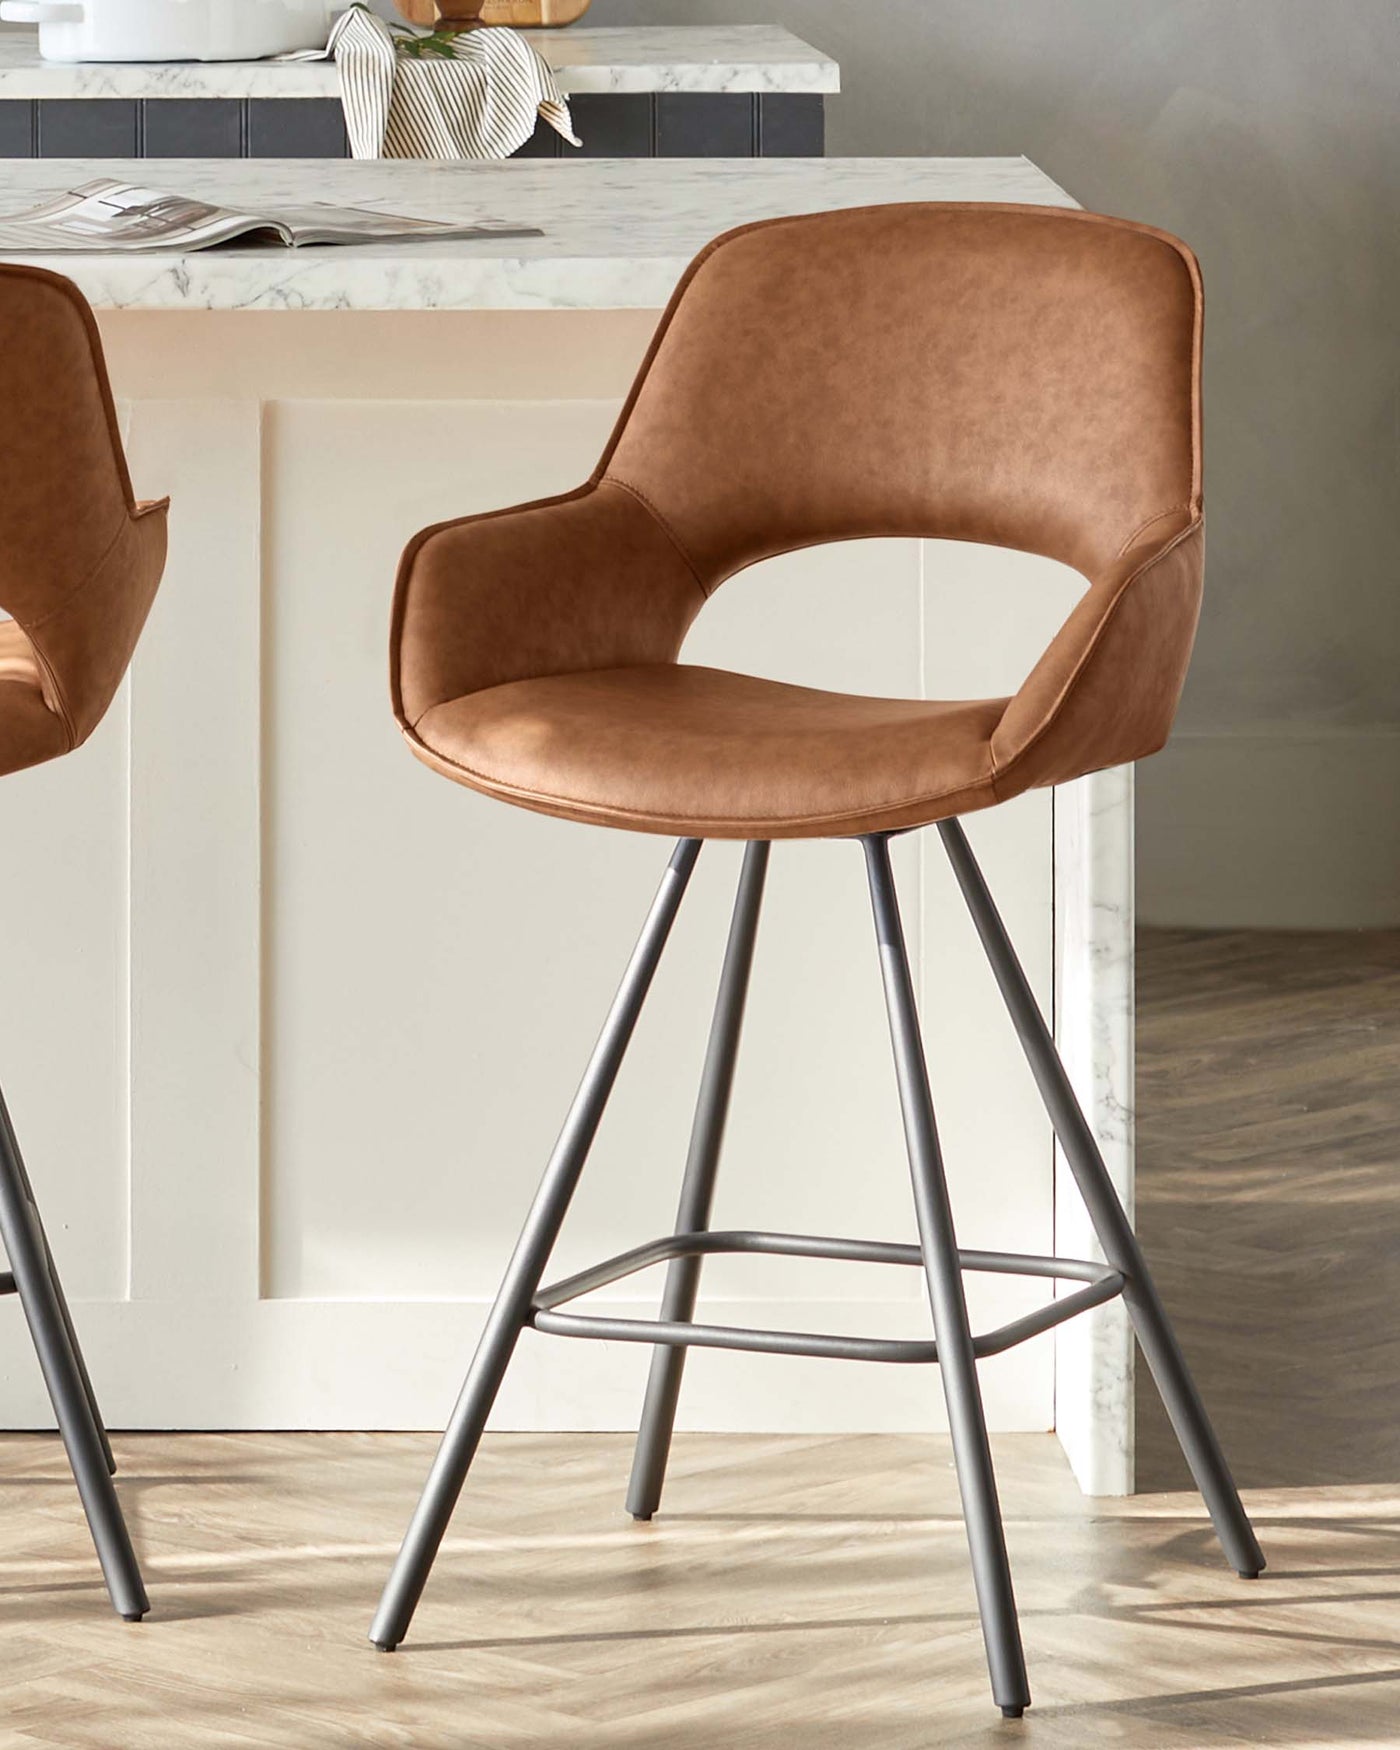 Elegant modern bar stool with a smooth caramel brown faux leather upholstery and curved backrest, featuring a minimalistic black metal frame with four legs and footrest for added comfort.